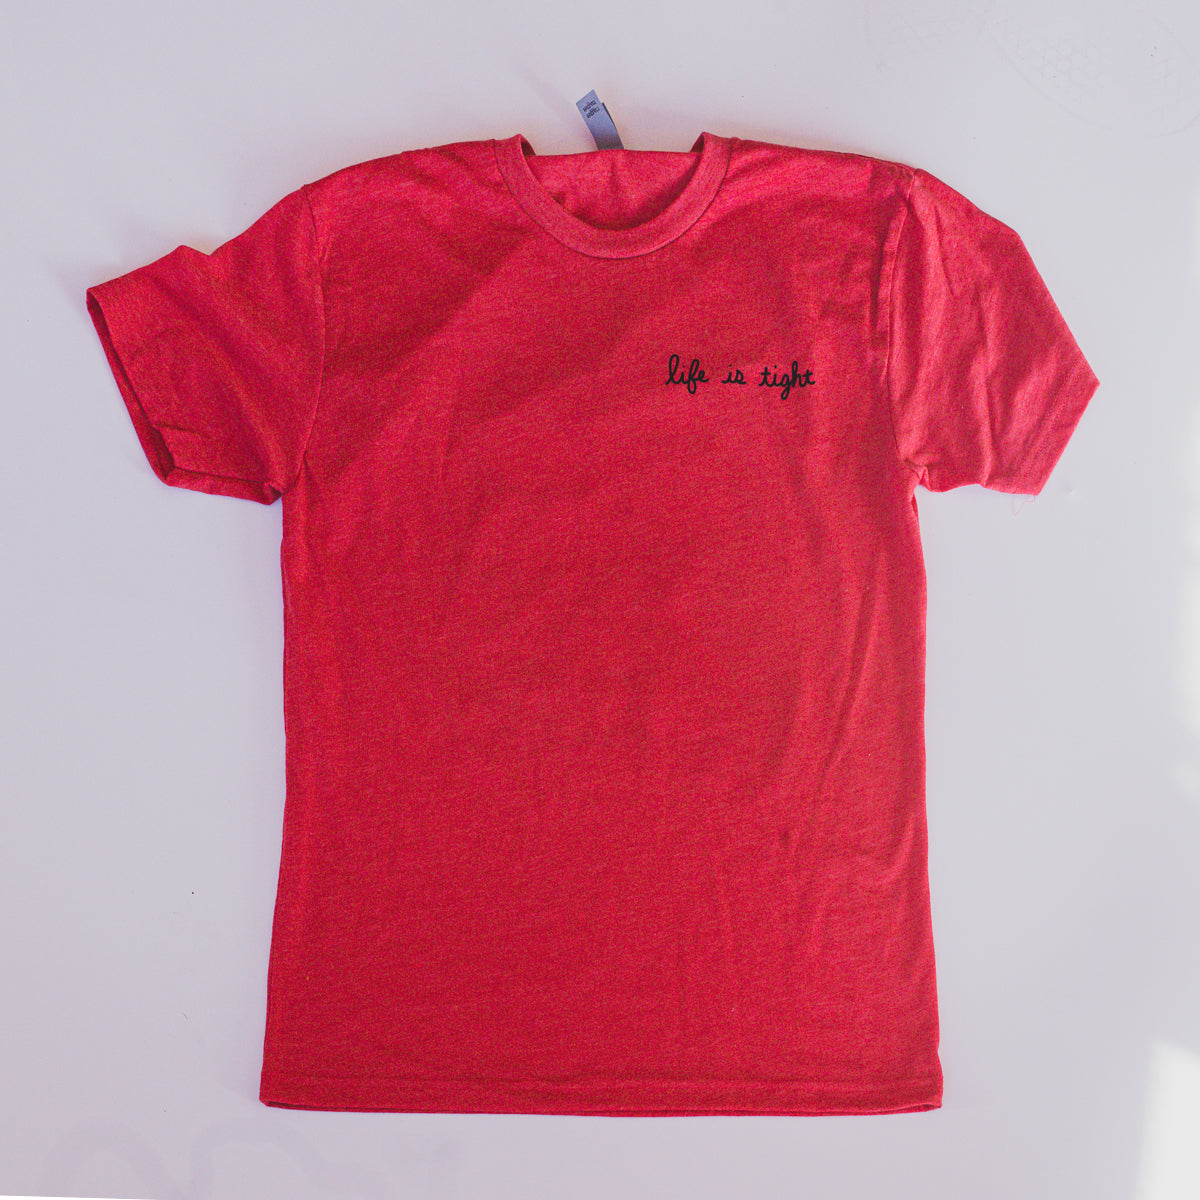 Life is Tight "Sky Diving" T-Shirt // Red